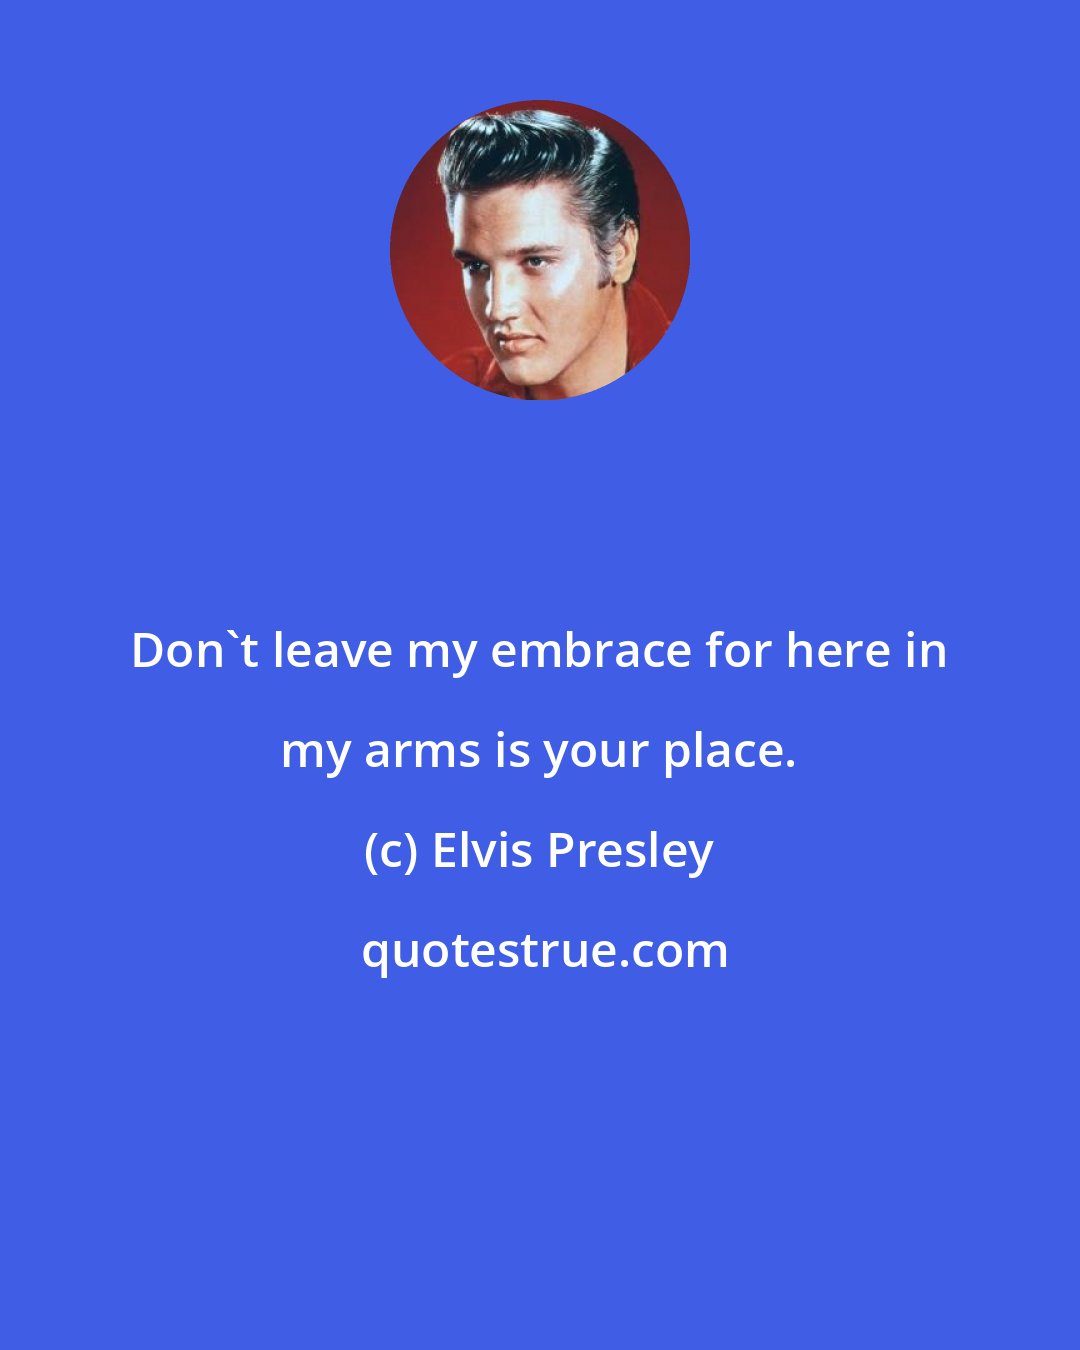 Elvis Presley: Don't leave my embrace for here in my arms is your place.